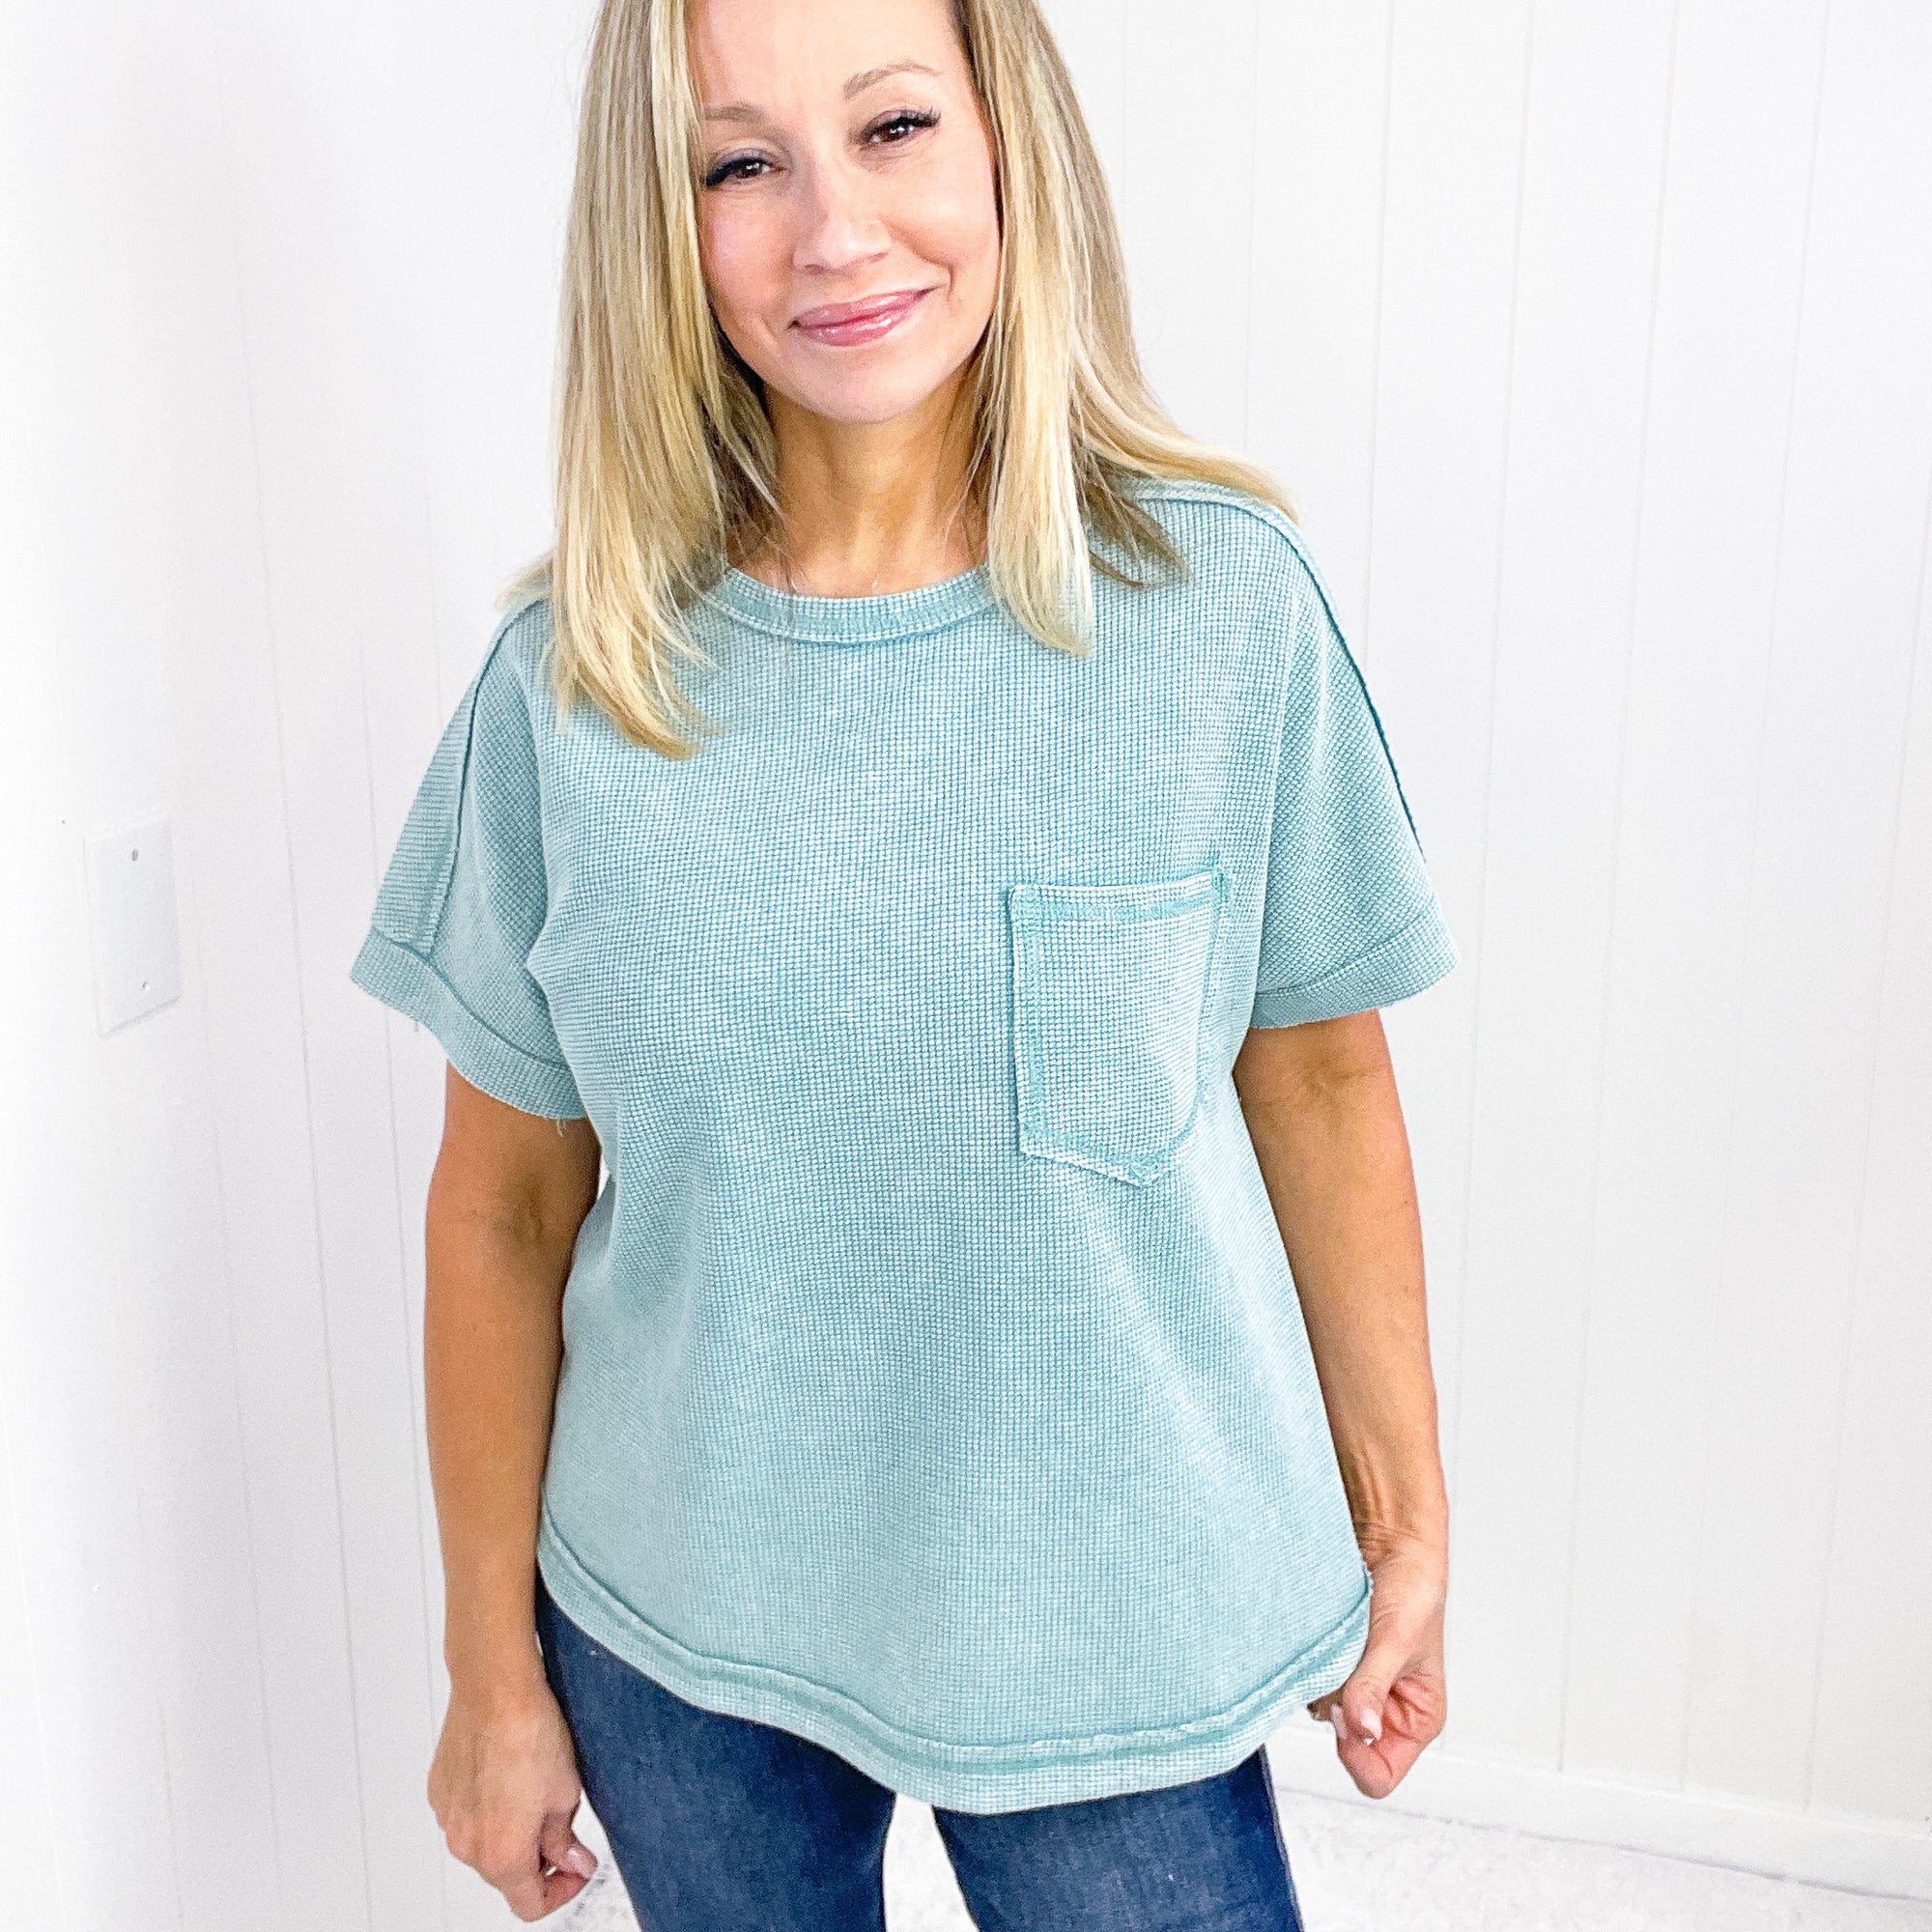 Mineral Washed Teal End of Beginning Short Sleeve Top